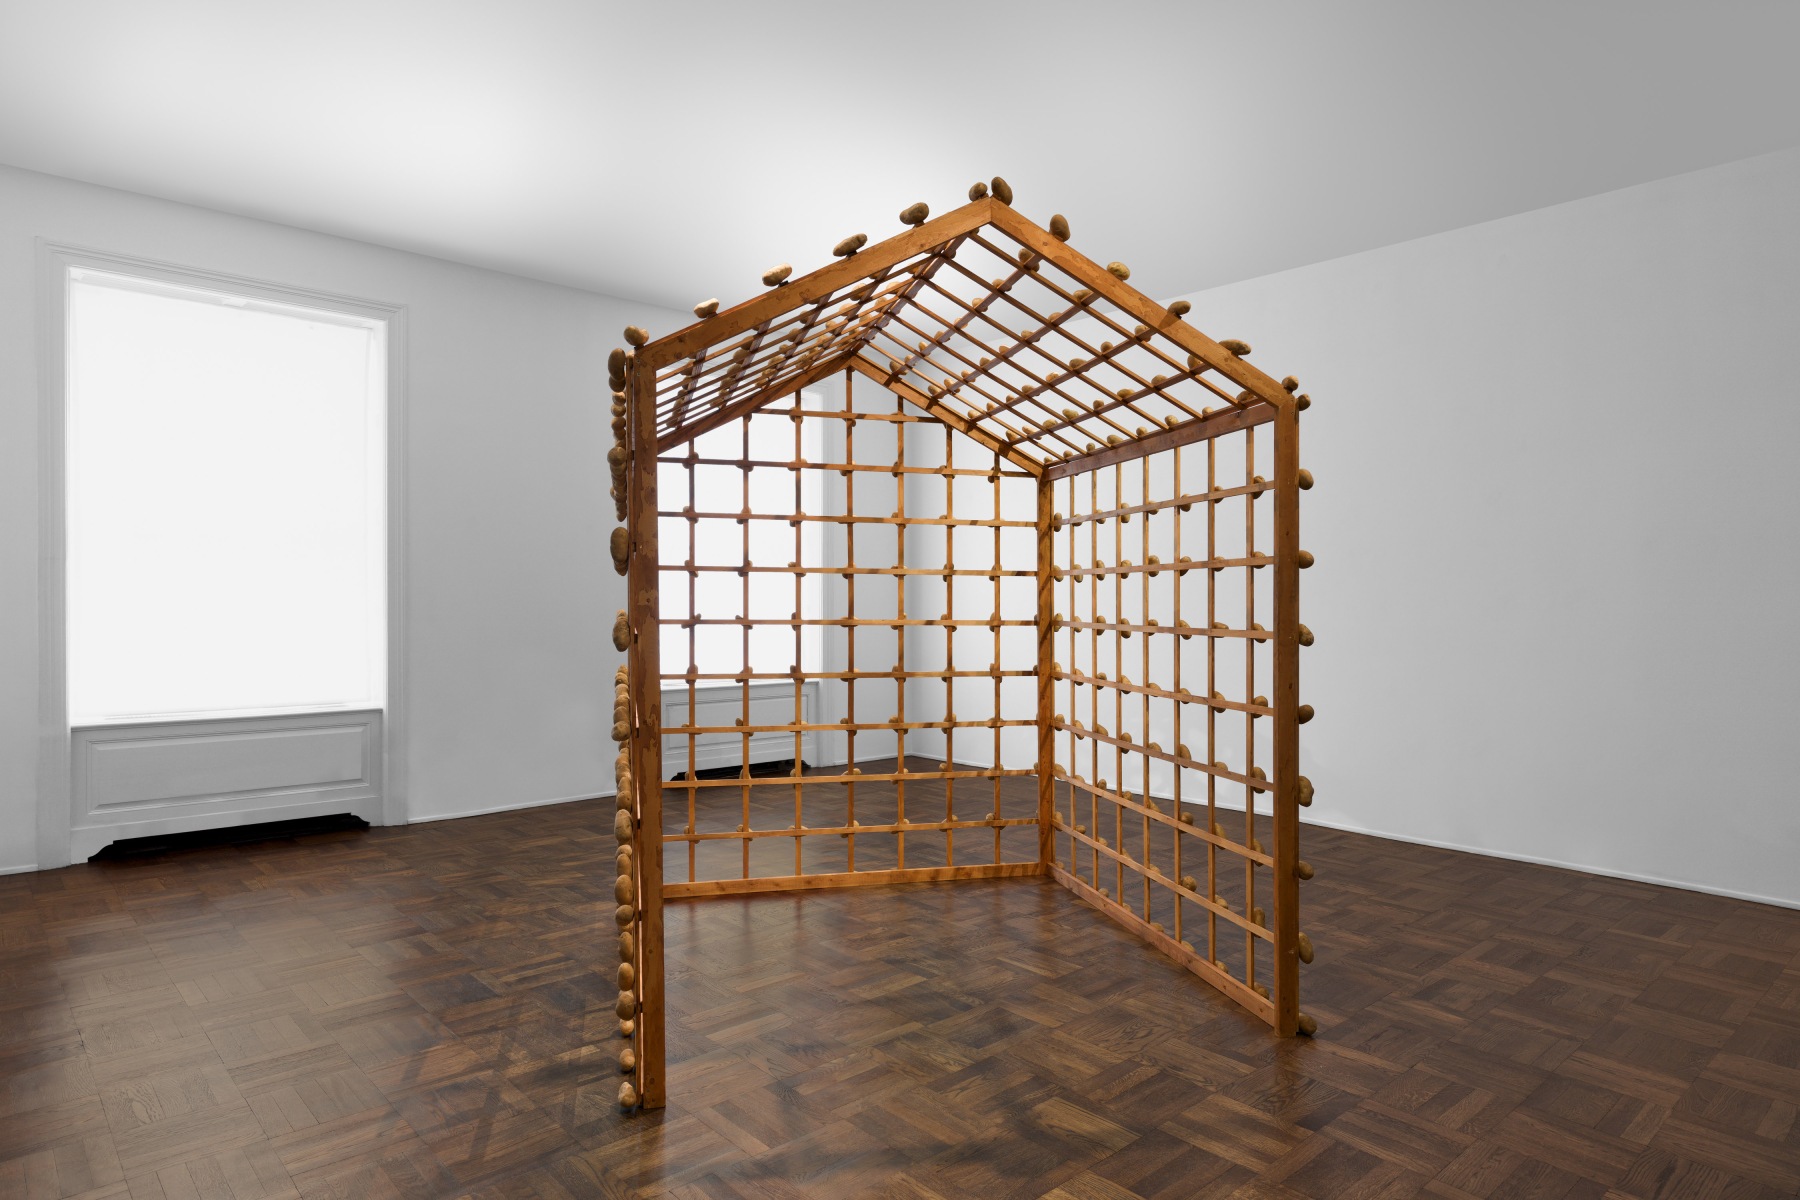 SIGMAR POLKE, Objects: Real and Imagined, 18 September - 16 November 2019 UPPER EAST SIDE, NEW YORK, Installation View 3